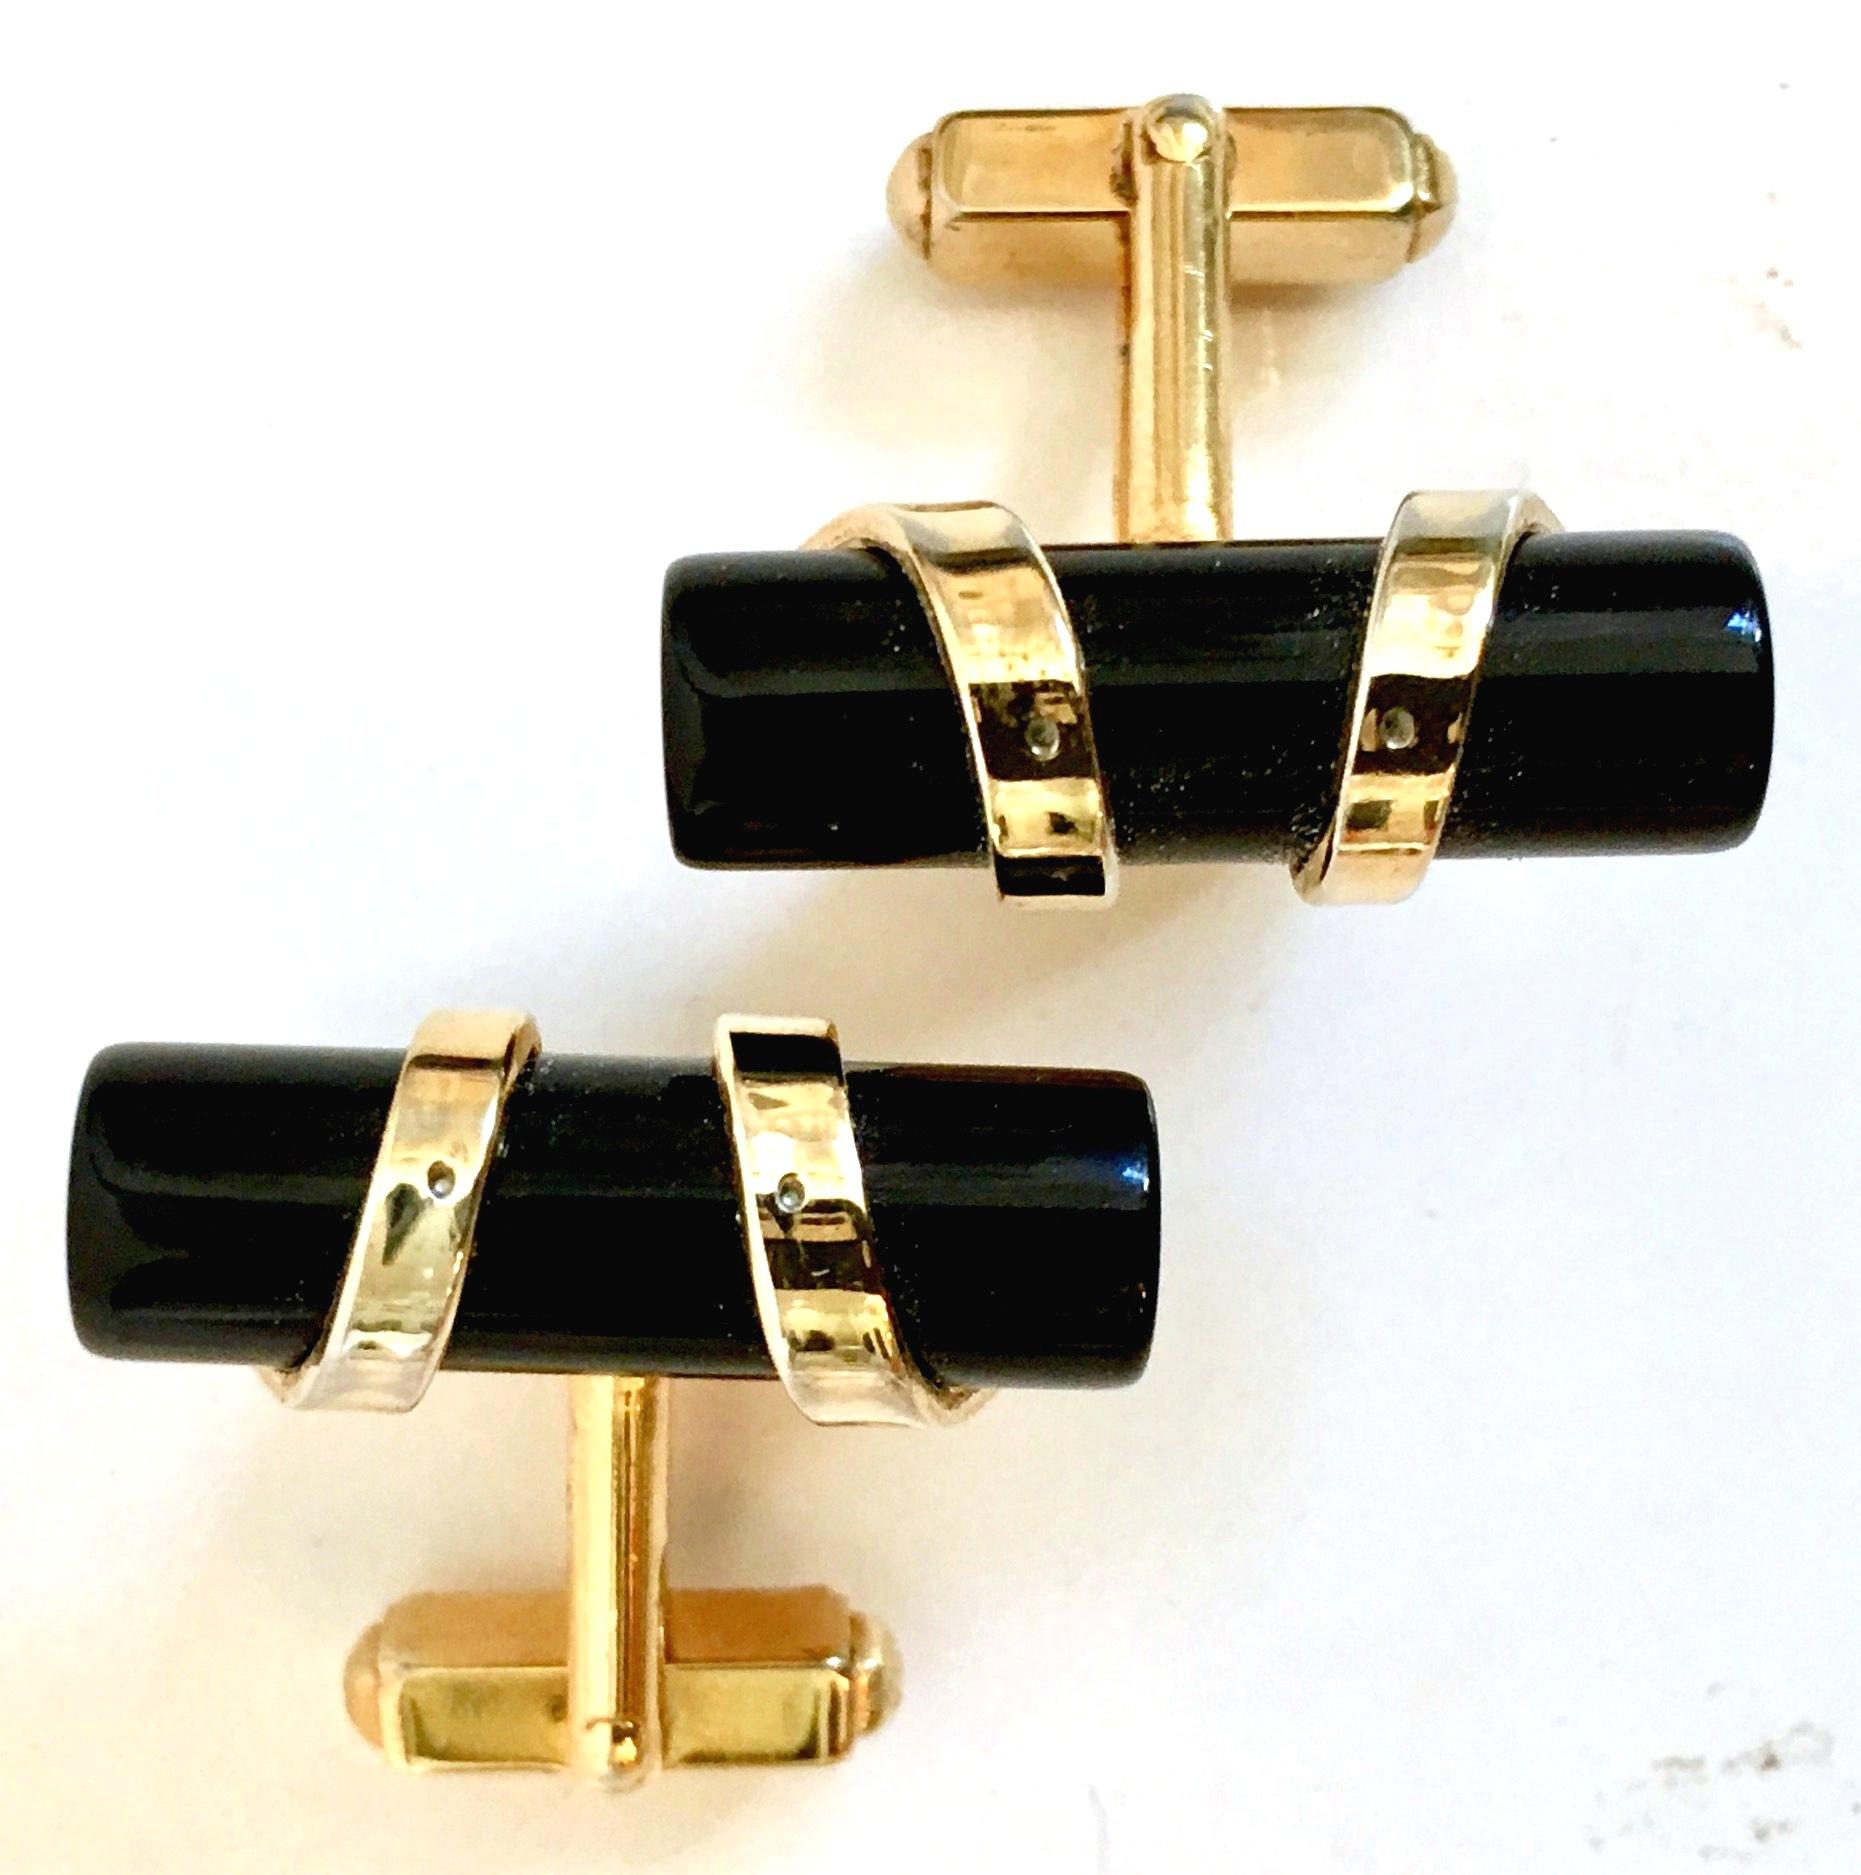 1950'S Art Deco style tubular authentic onyx wrapped in 12K gold cuff links by, Anson.
These vintage cuff links are signed, Anson.